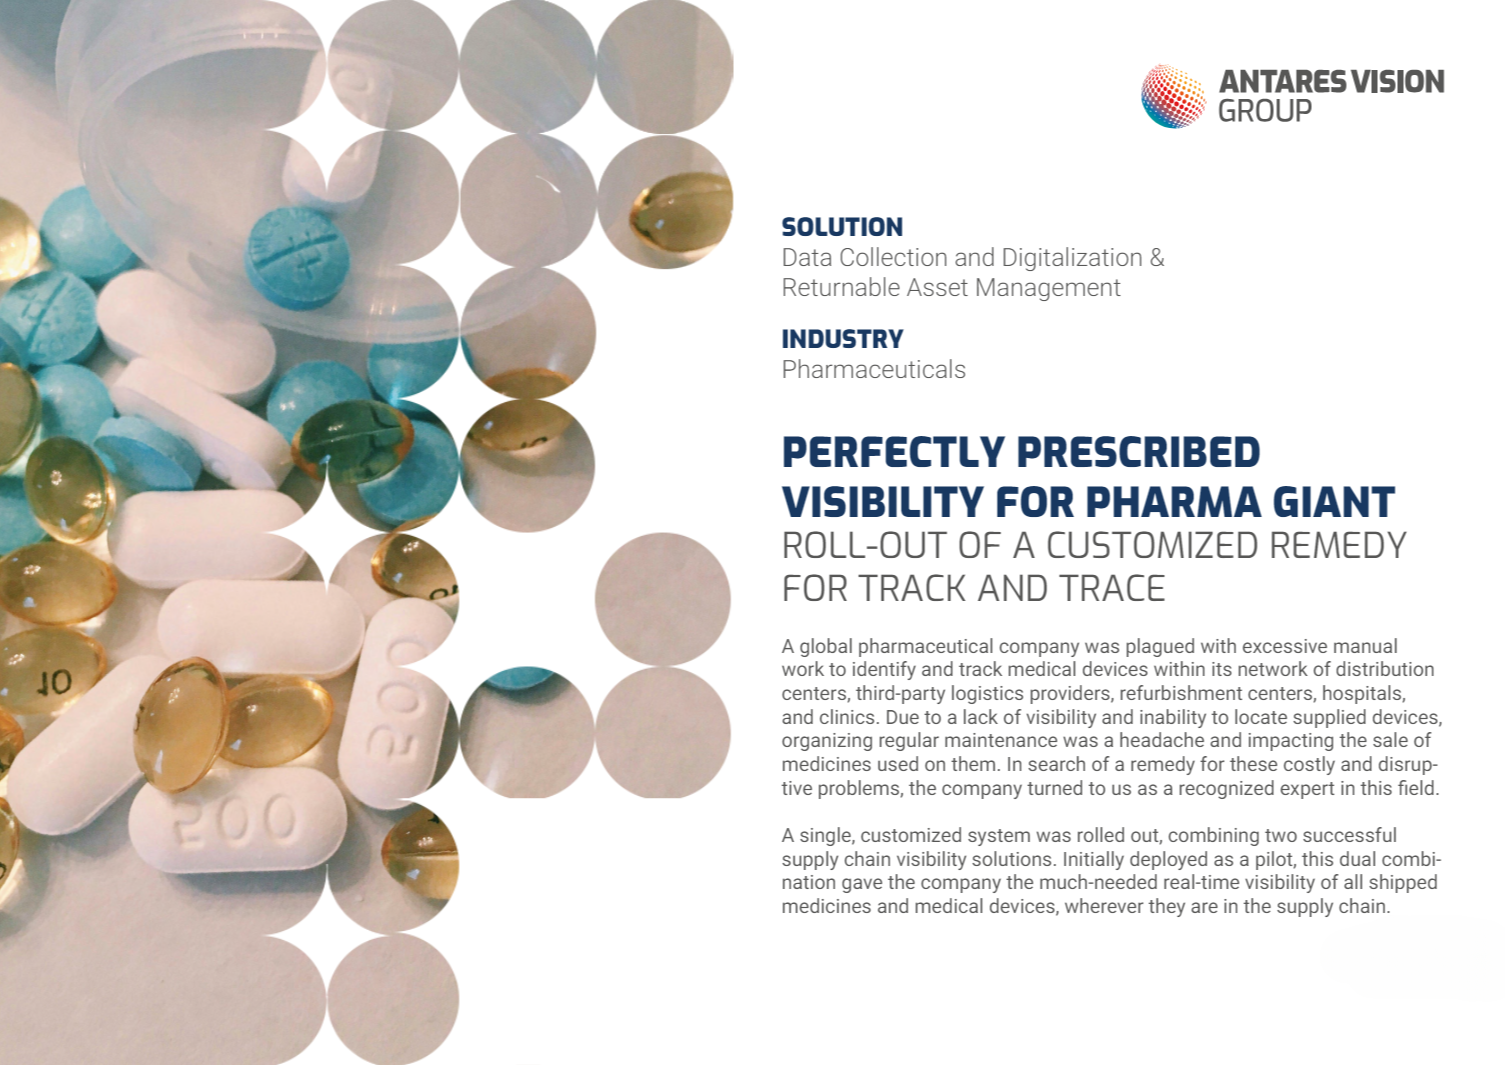 PERFECTLY PRESCRIBED VISIBILITY FOR PHARMA GIANT